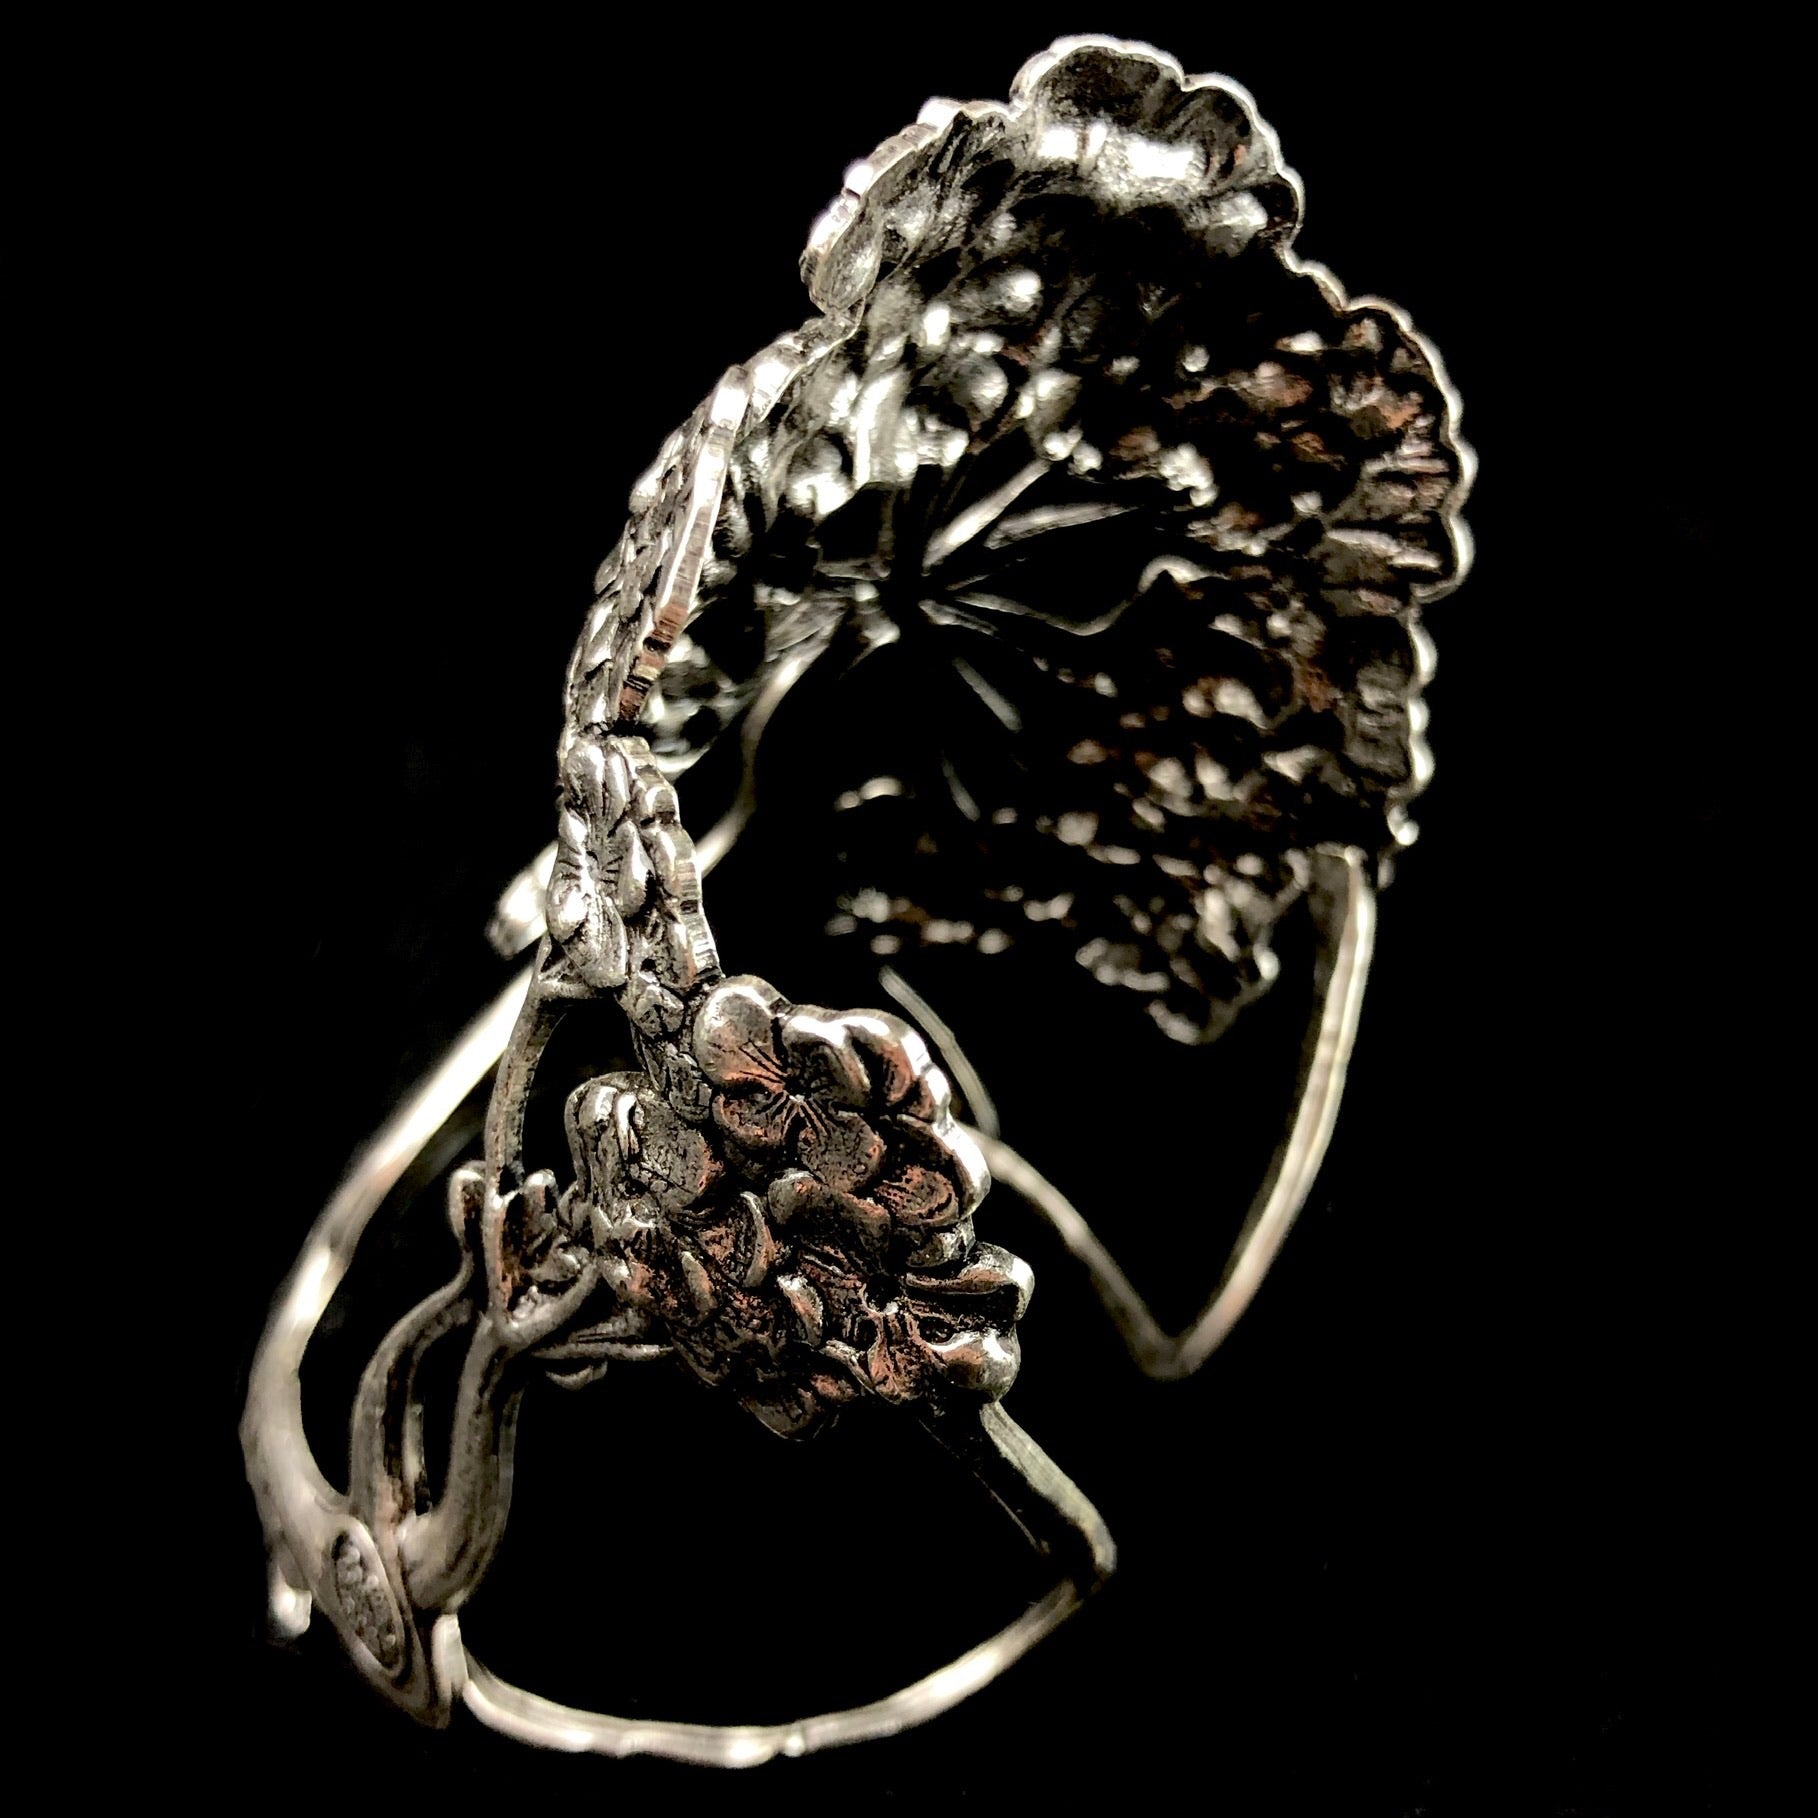 Back view of Silver Wisteria Cuff showing stamped metal and shape